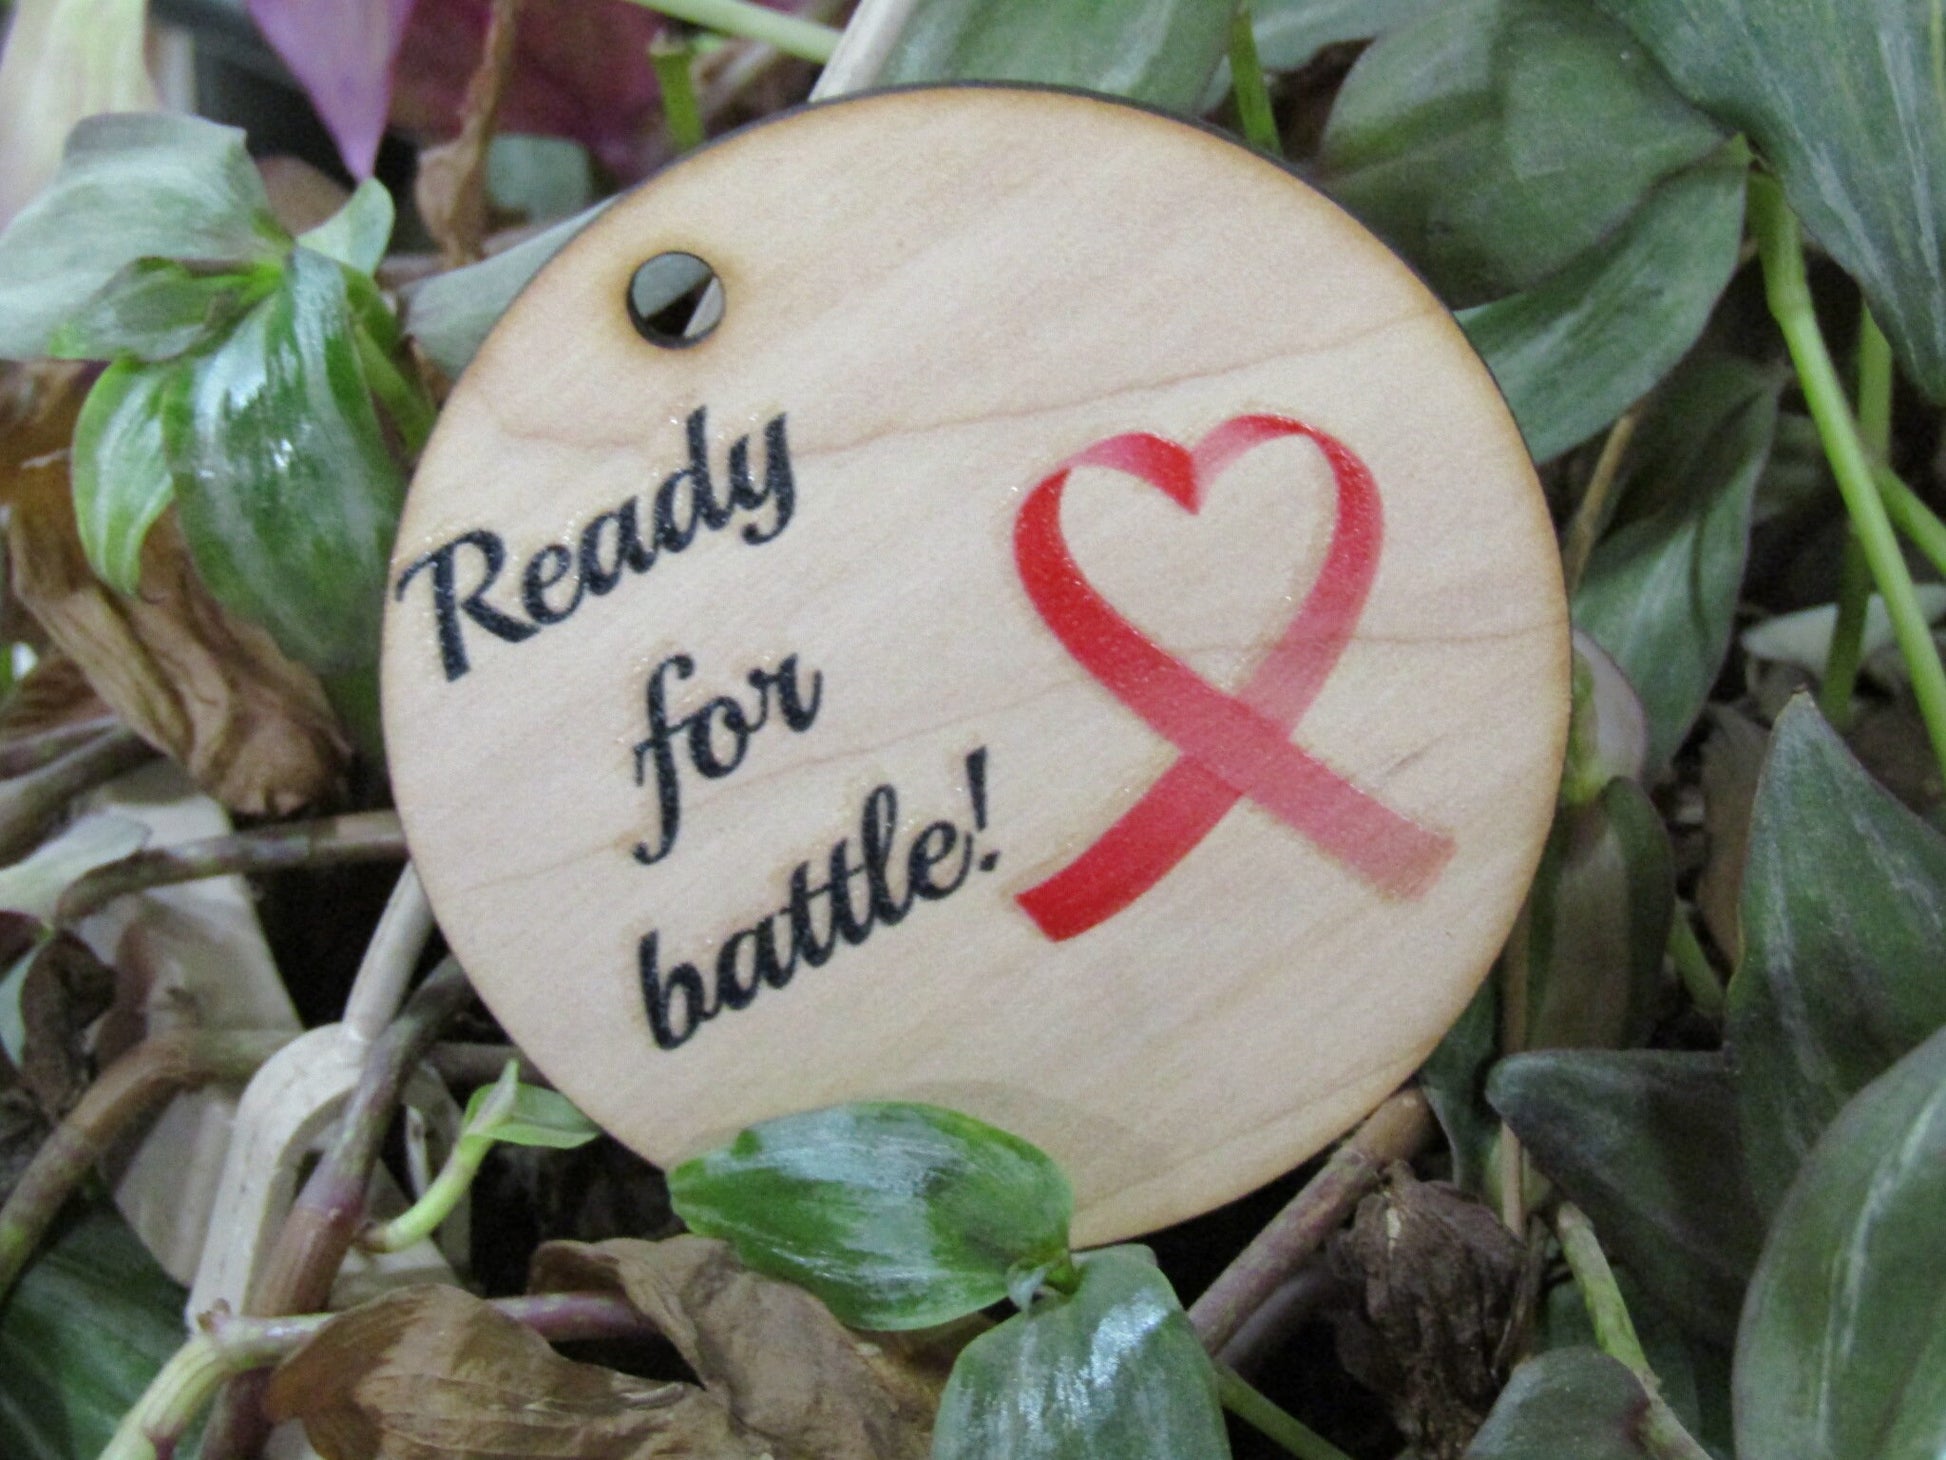 Ready For Battle Cancer Breast Cancer Ornament Gift Tag Christmas Gift For Loved One Printed Image Woodslice Tree Trimming Birch Pink Ribbon